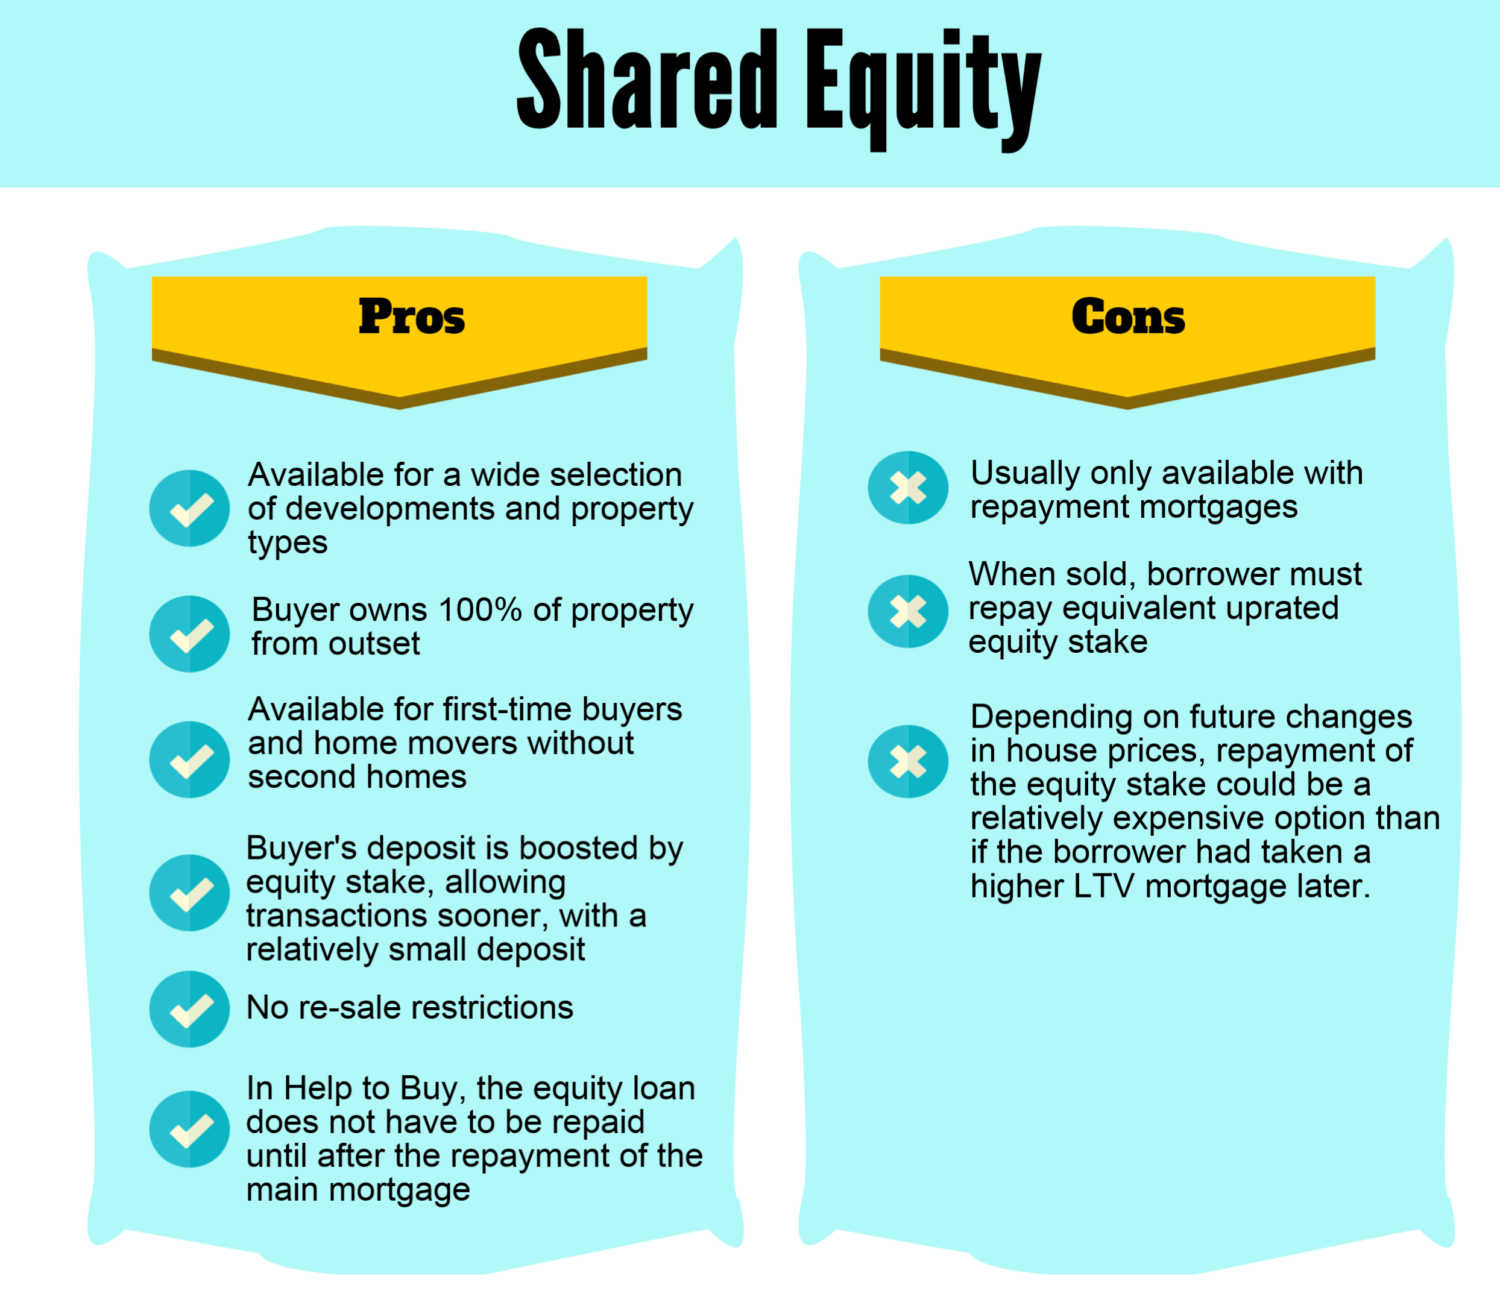 Shared equity pros and cons.